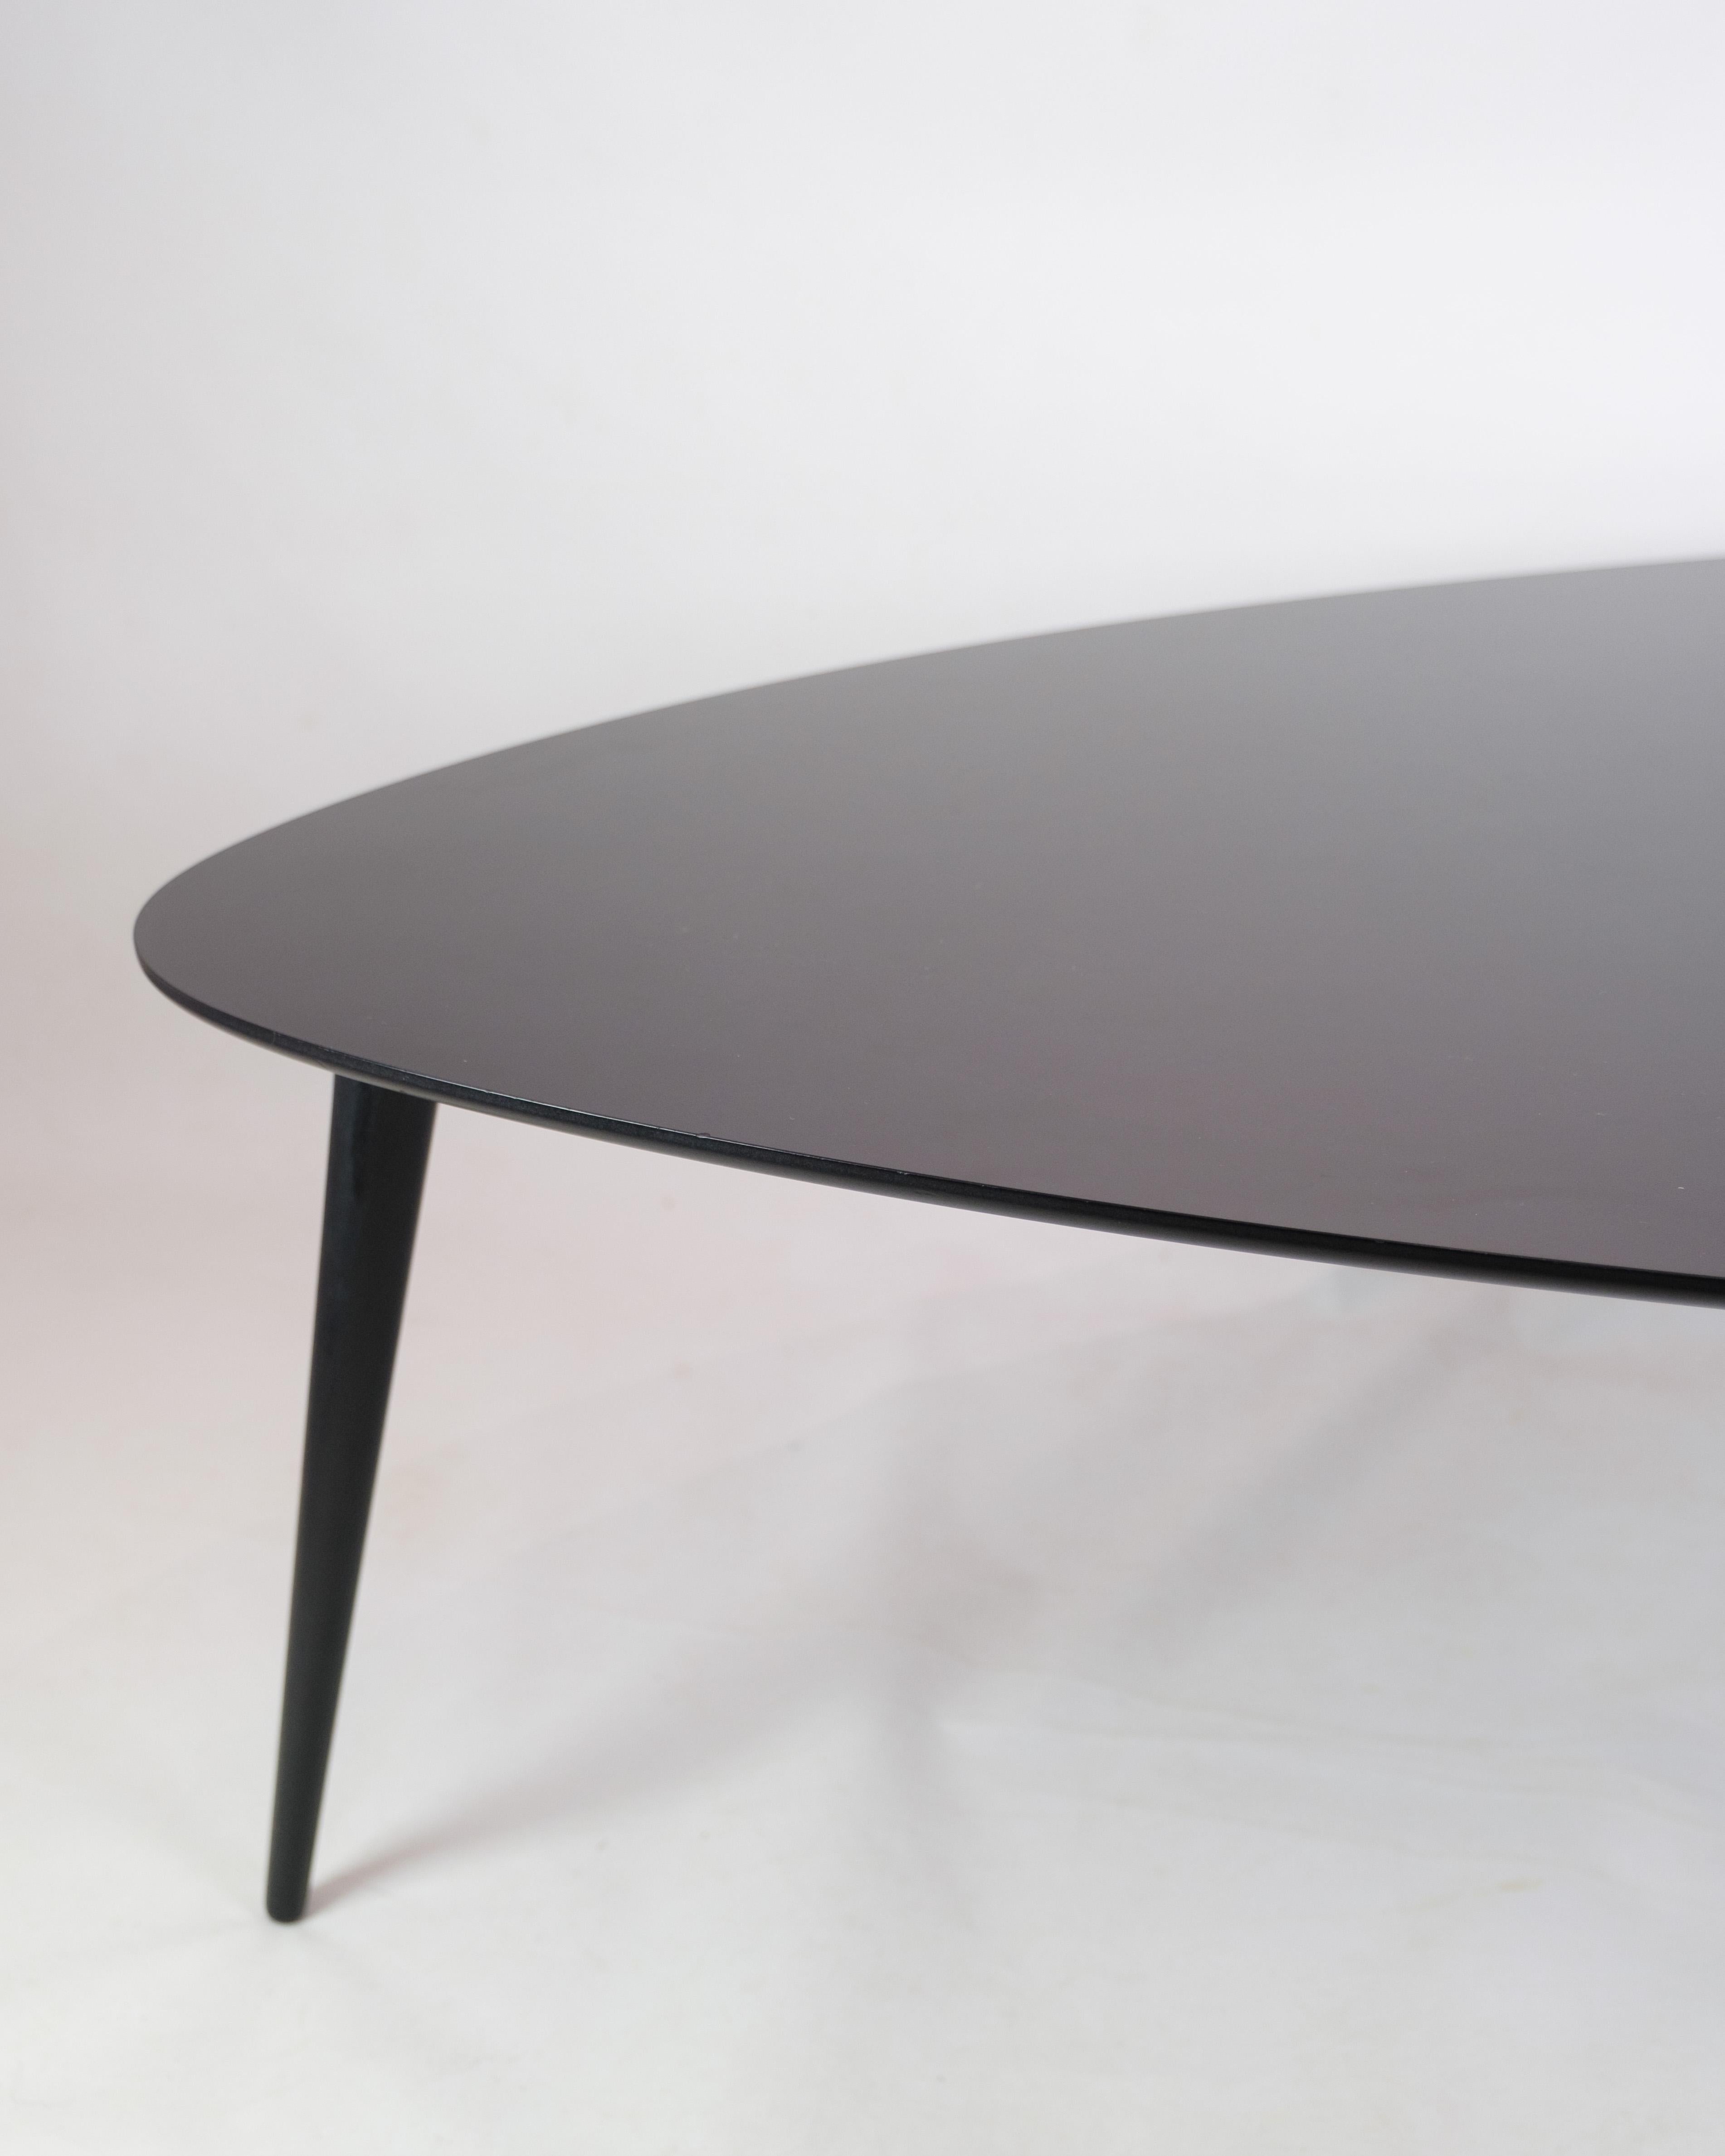 Danish Coffee table In Black Laminate With Oak legs, Made By Fredericia Furniture